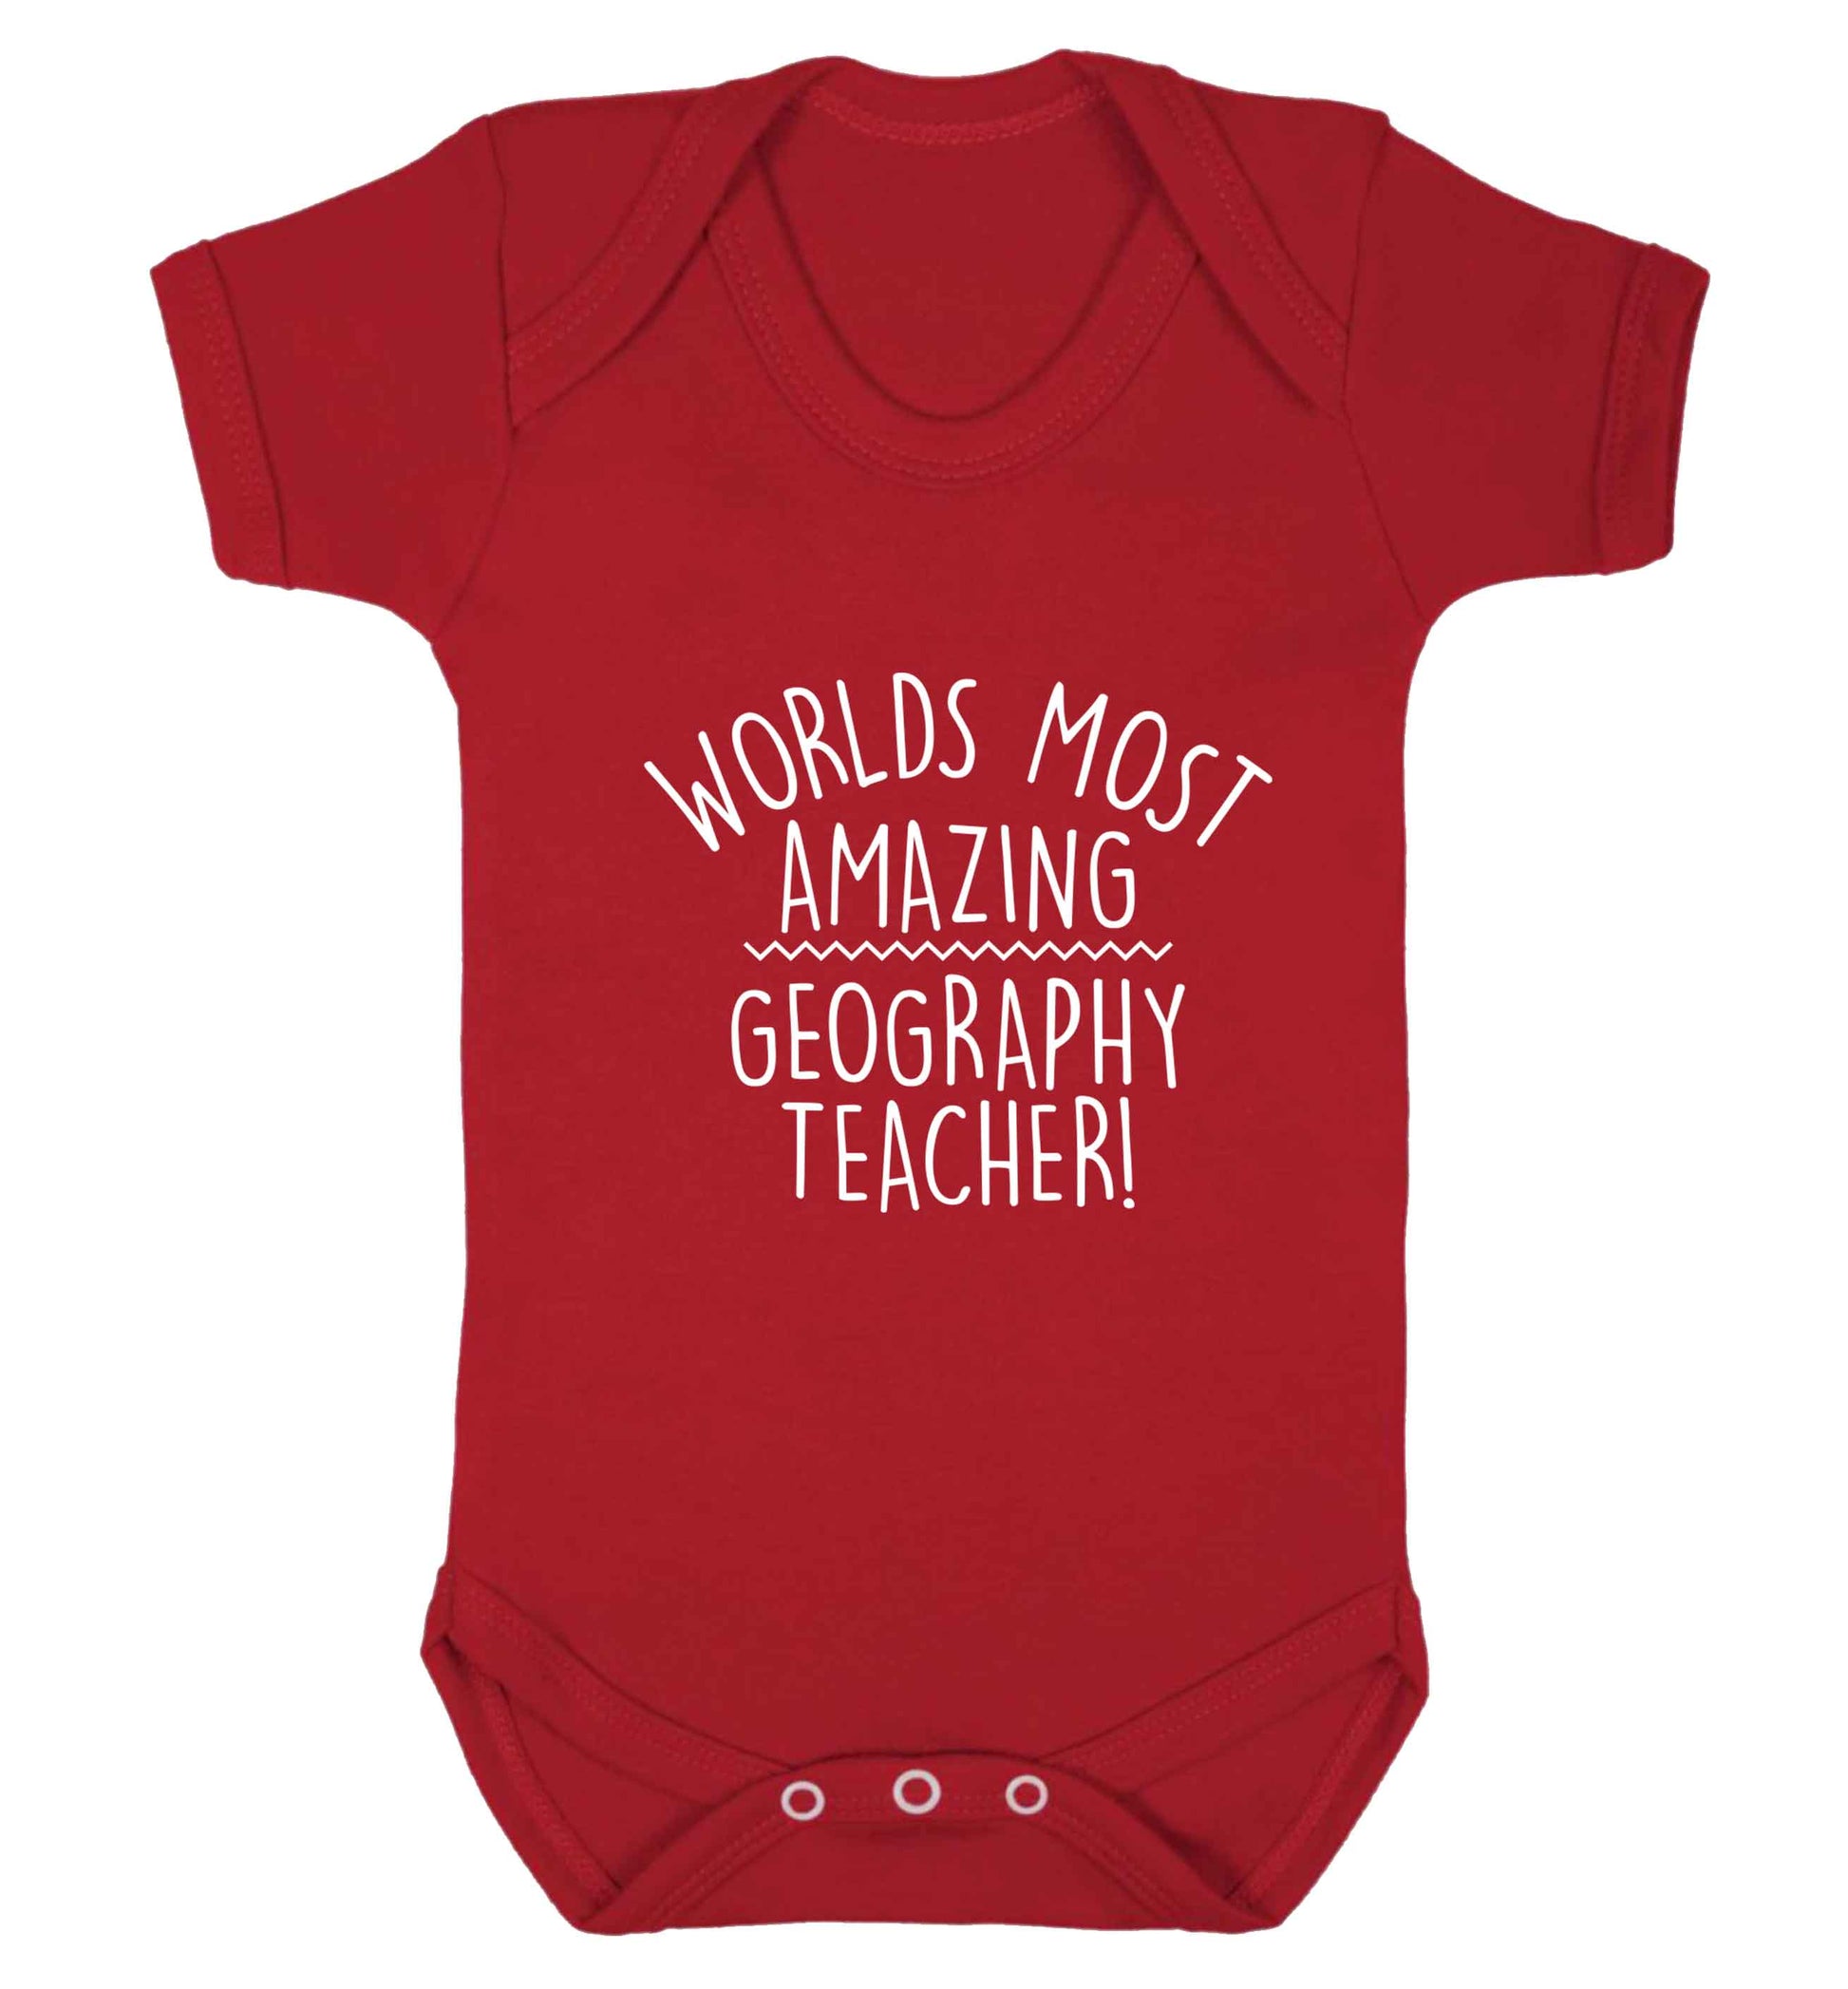 Worlds most amazing geography teacher baby vest red 18-24 months